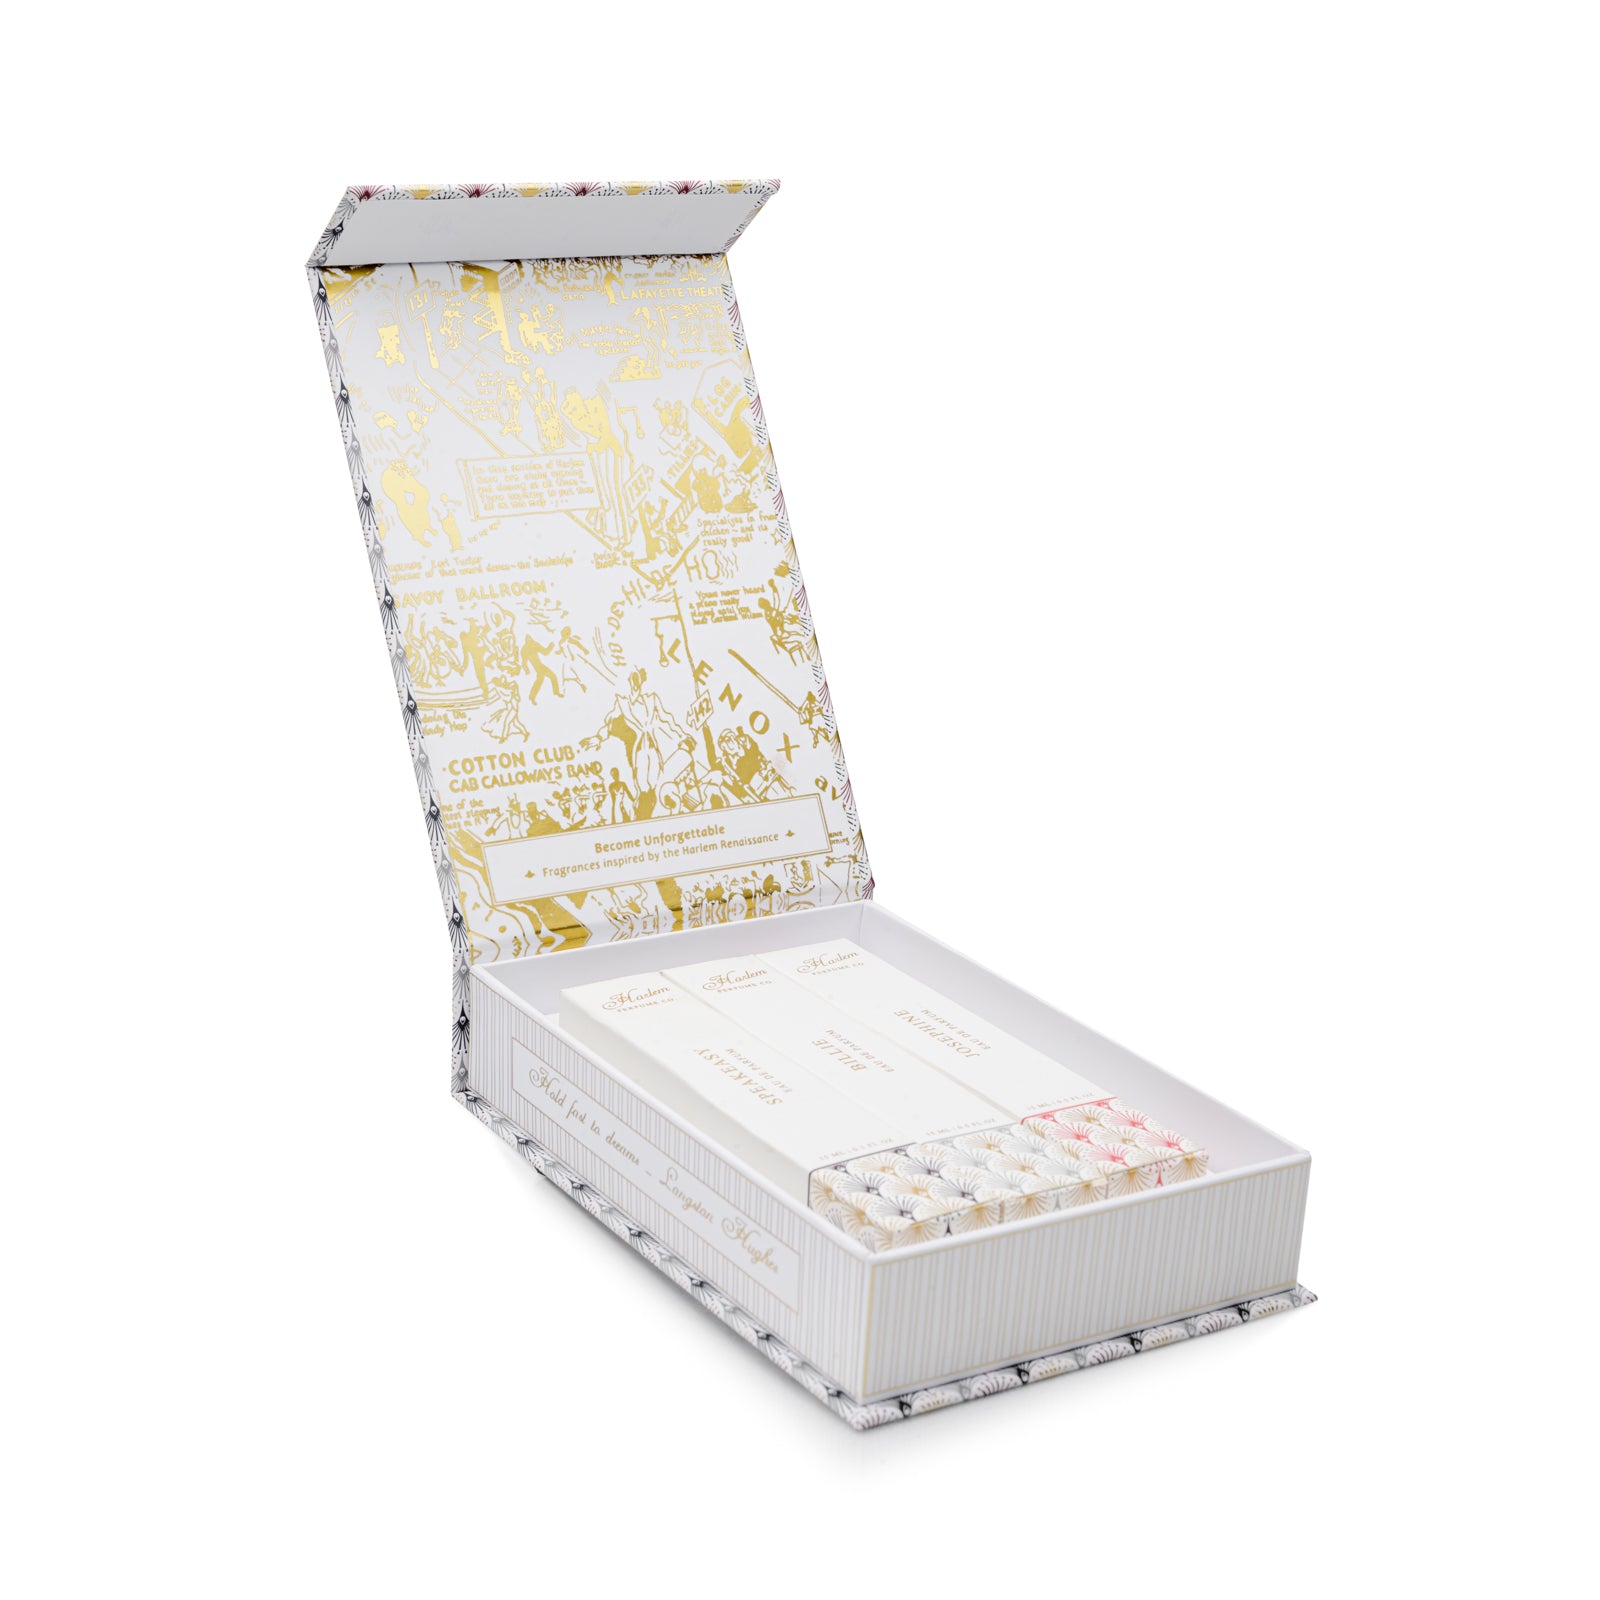 This is an image of the Harlem Perfume Co. Discovery Box Open with three 15 ml perfumes inside.